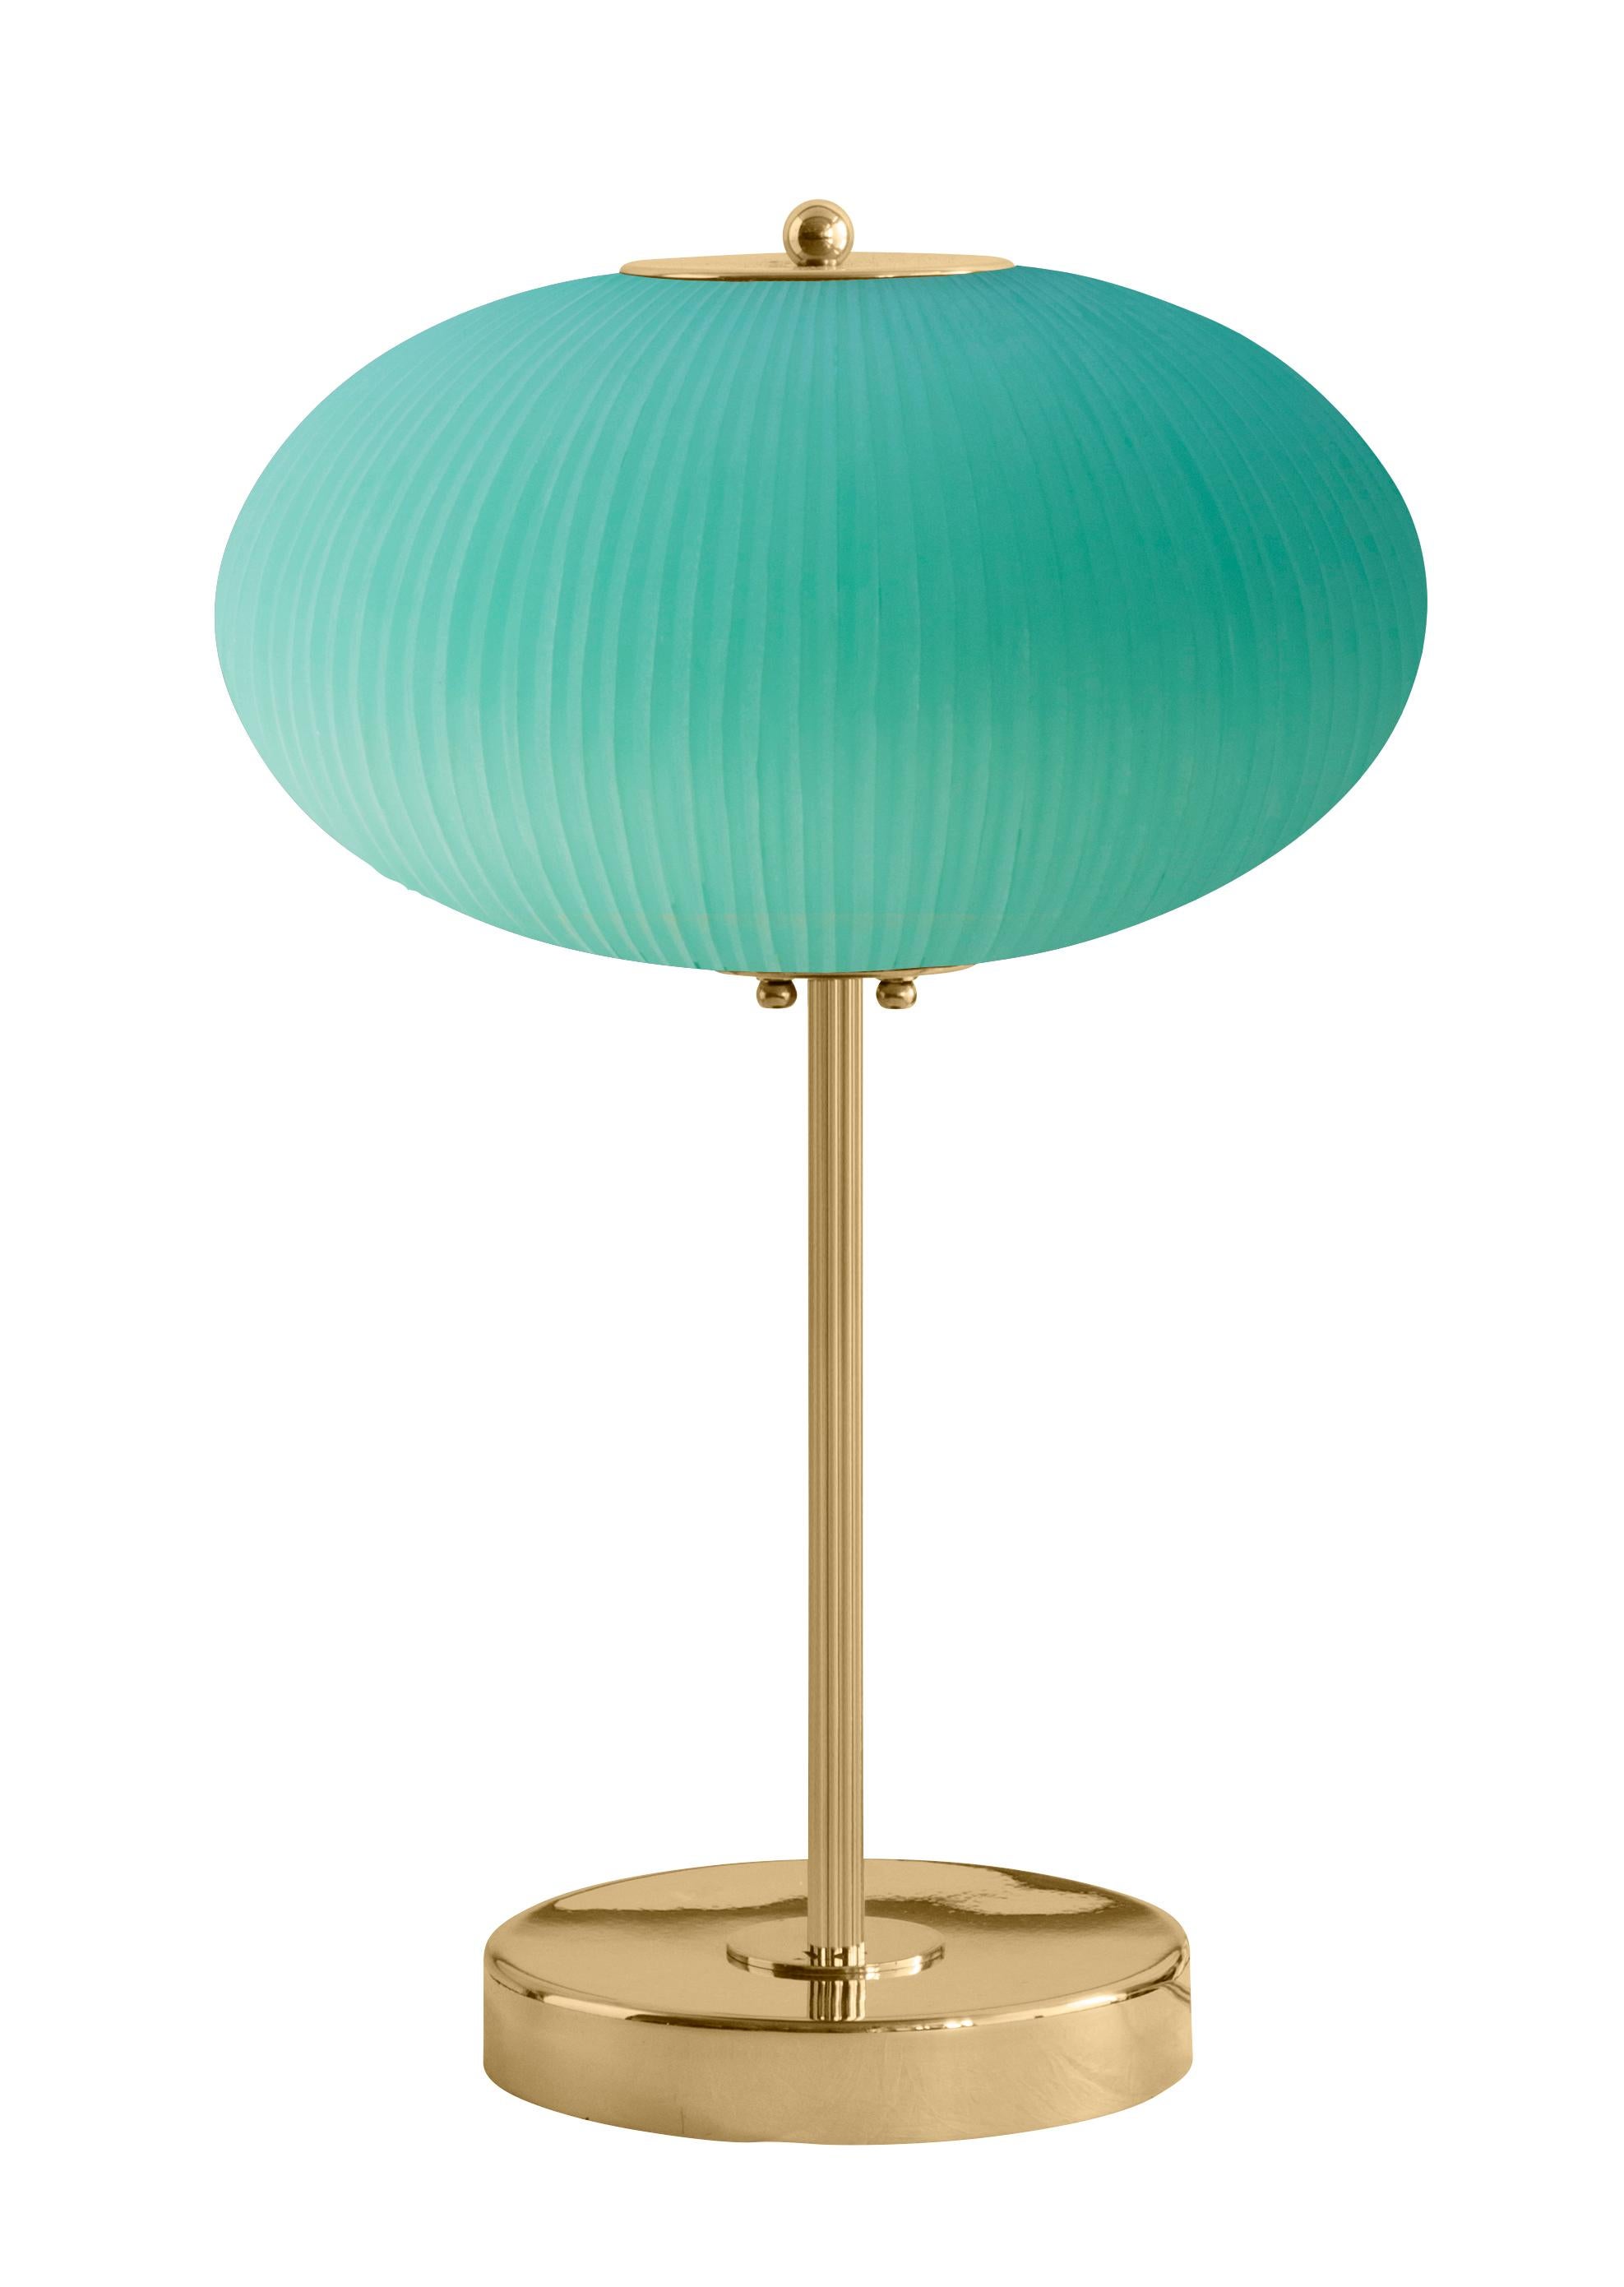 Table lamp China 07 by Magic Circus Editions
Dimensions: H 50 x W 32 x D 32 cm
Materials: Brass, mouth blown glass sculpted with a diamond saw
Colour: Jade green

Available finishes: Brass, nickel
Available colours: enamel soft white, soft